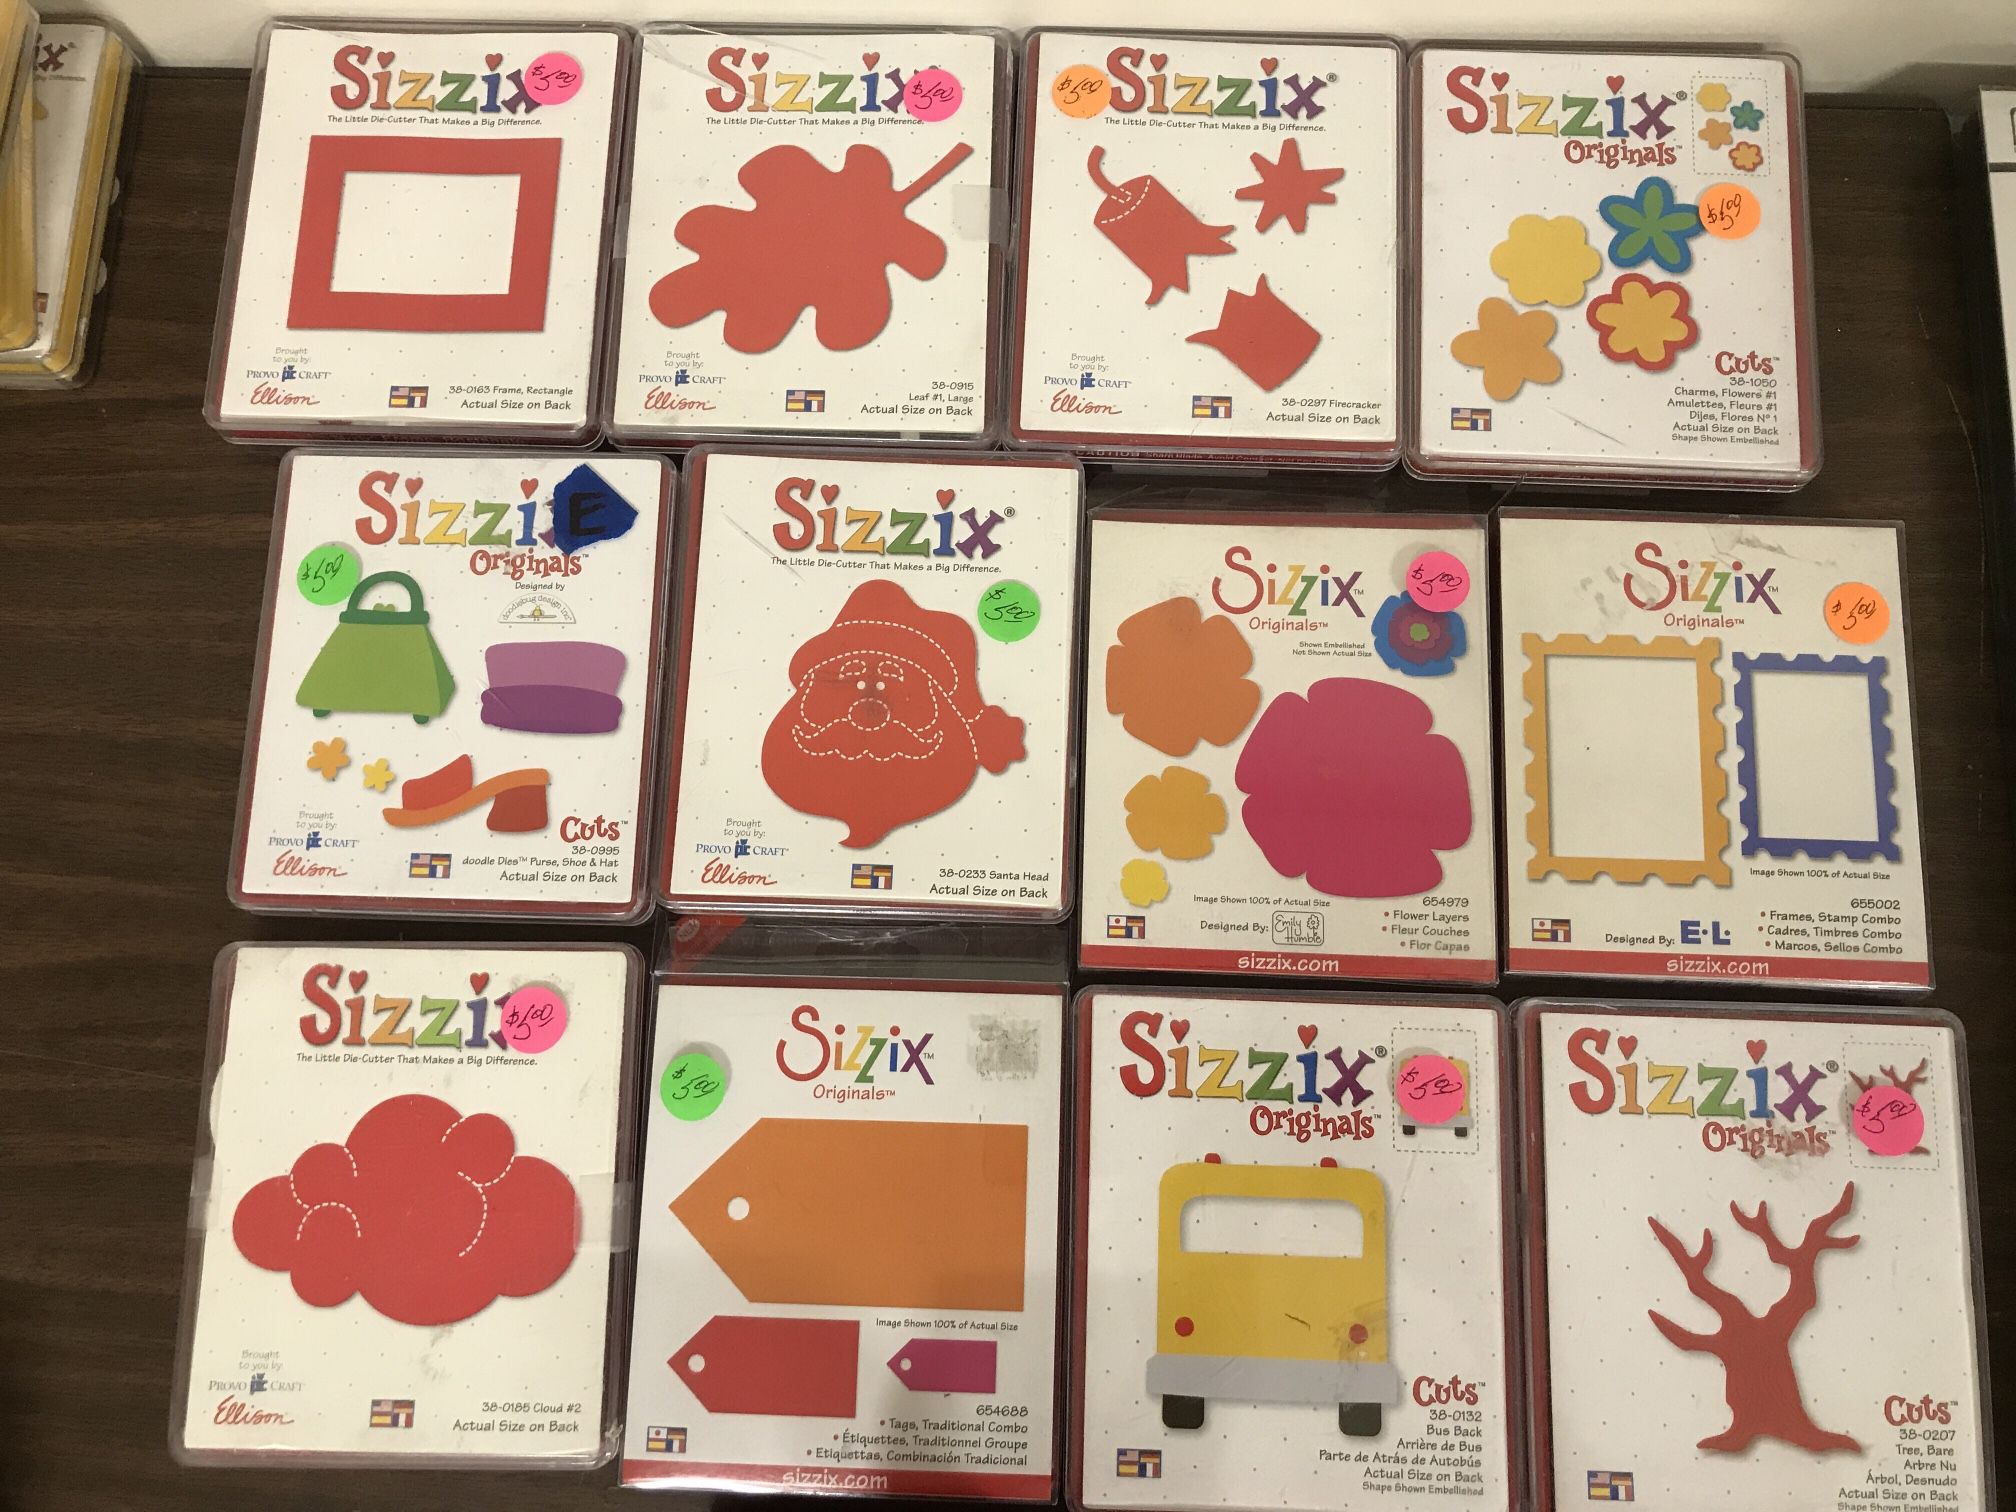 Sizzix Original Red Dies - Your Choice